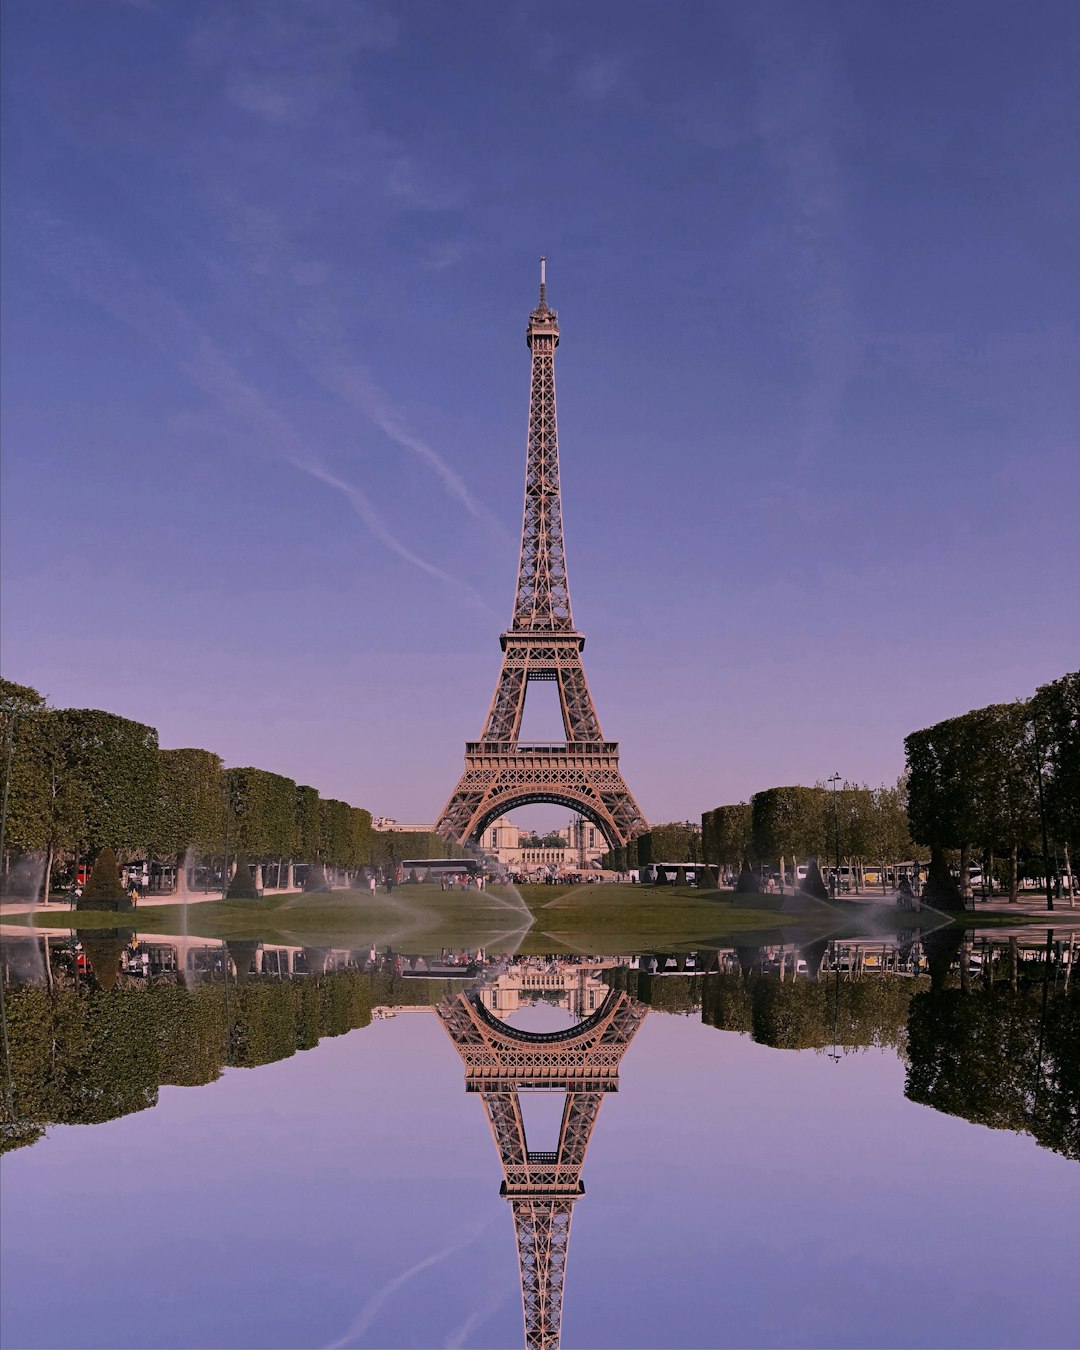 Classic view to the beautiful Eiffel tower with a mirror reflection (which is not real actually). Shot on iPhone X